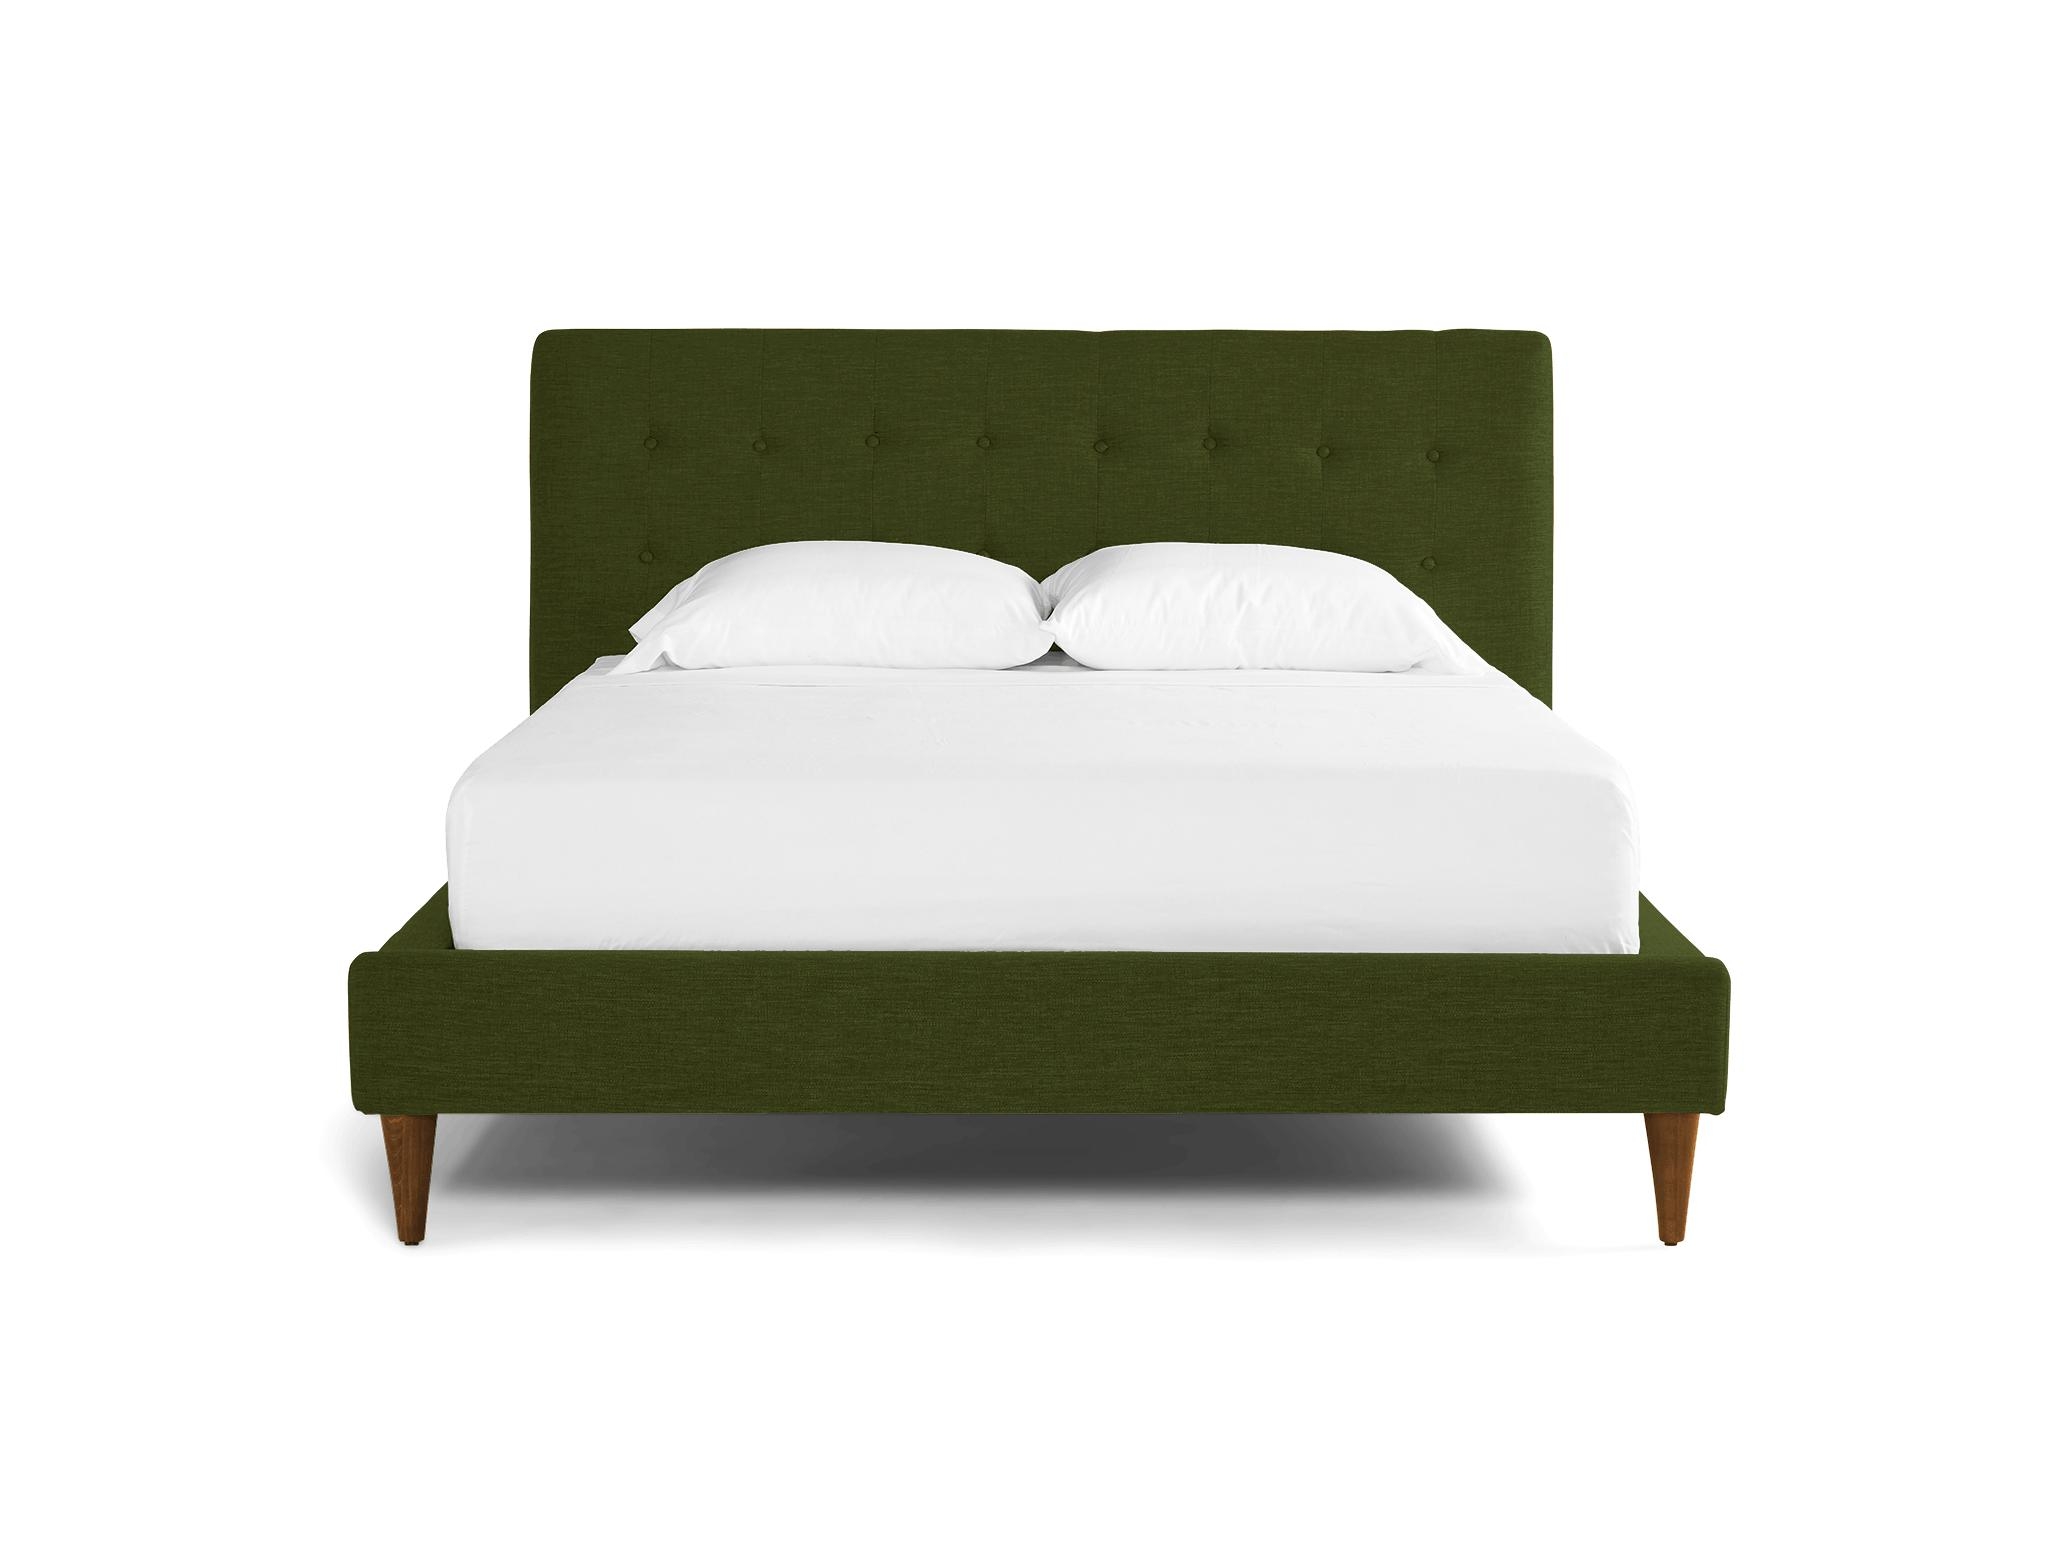 Green Eliot Mid Century Modern Bed - Royale Forest - Mocha - Queen - Image 0